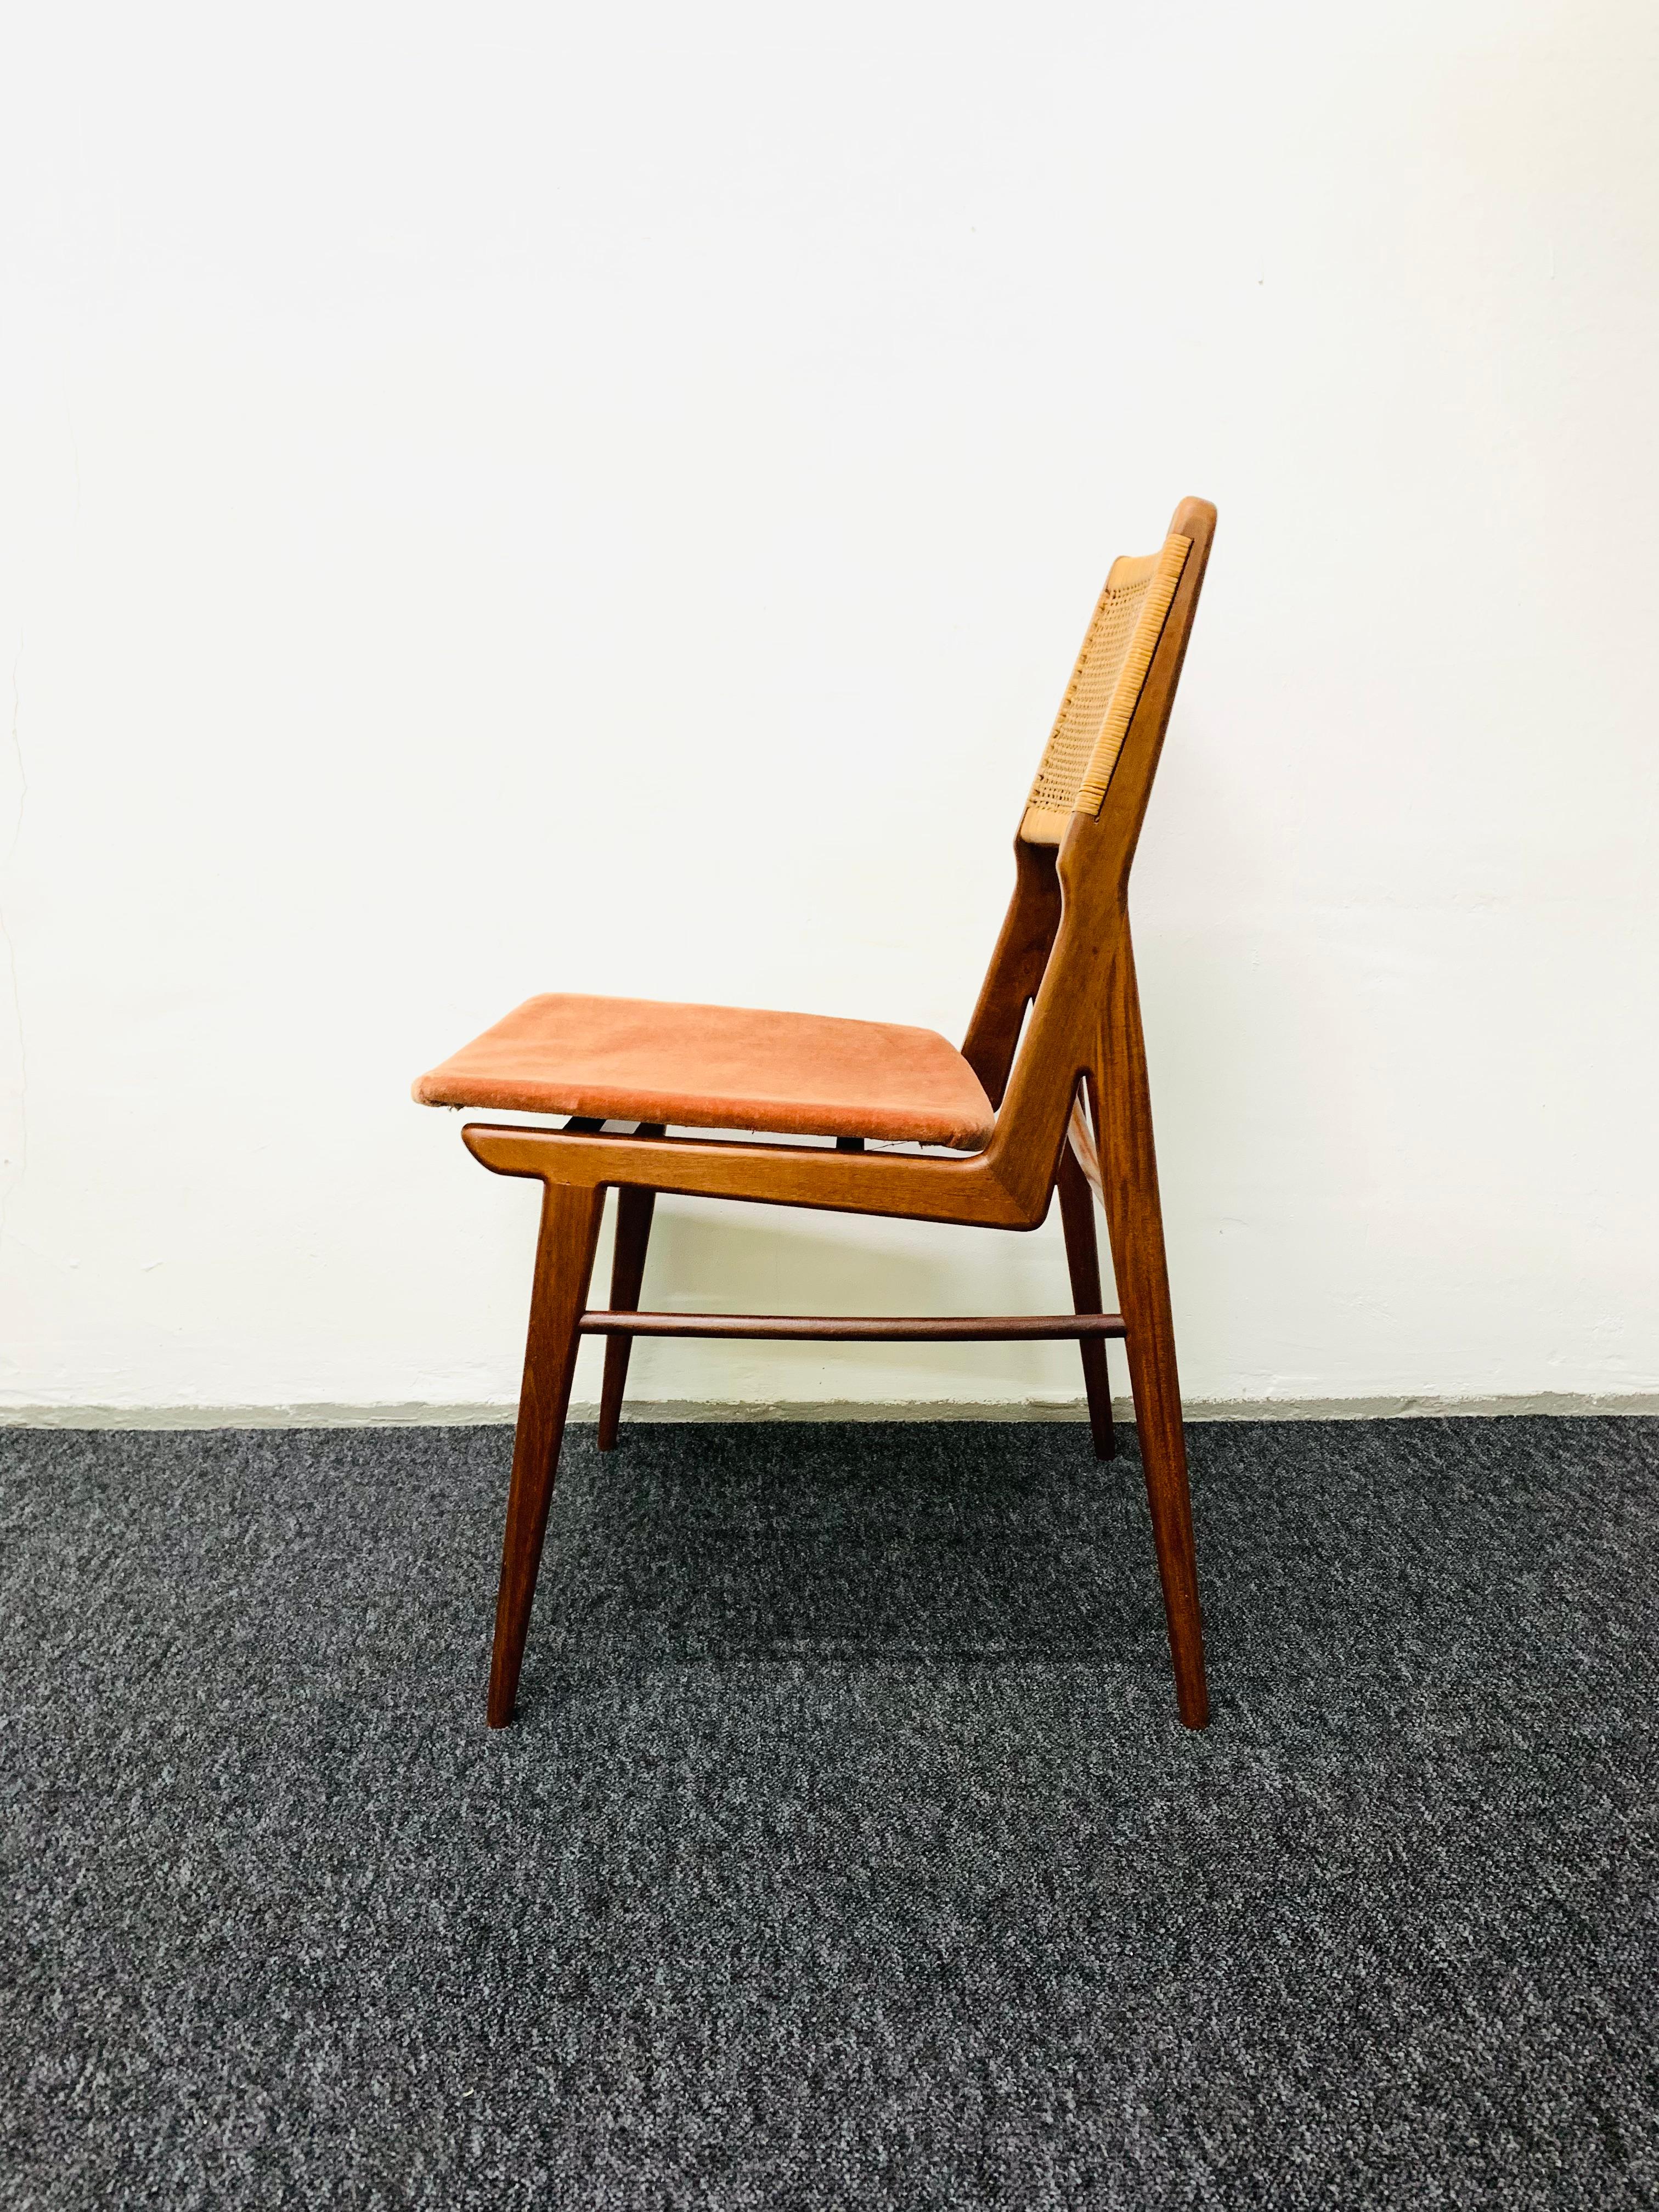 Set of 6 Beautiful Teakwood Dining Chairs In Good Condition For Sale In München, DE